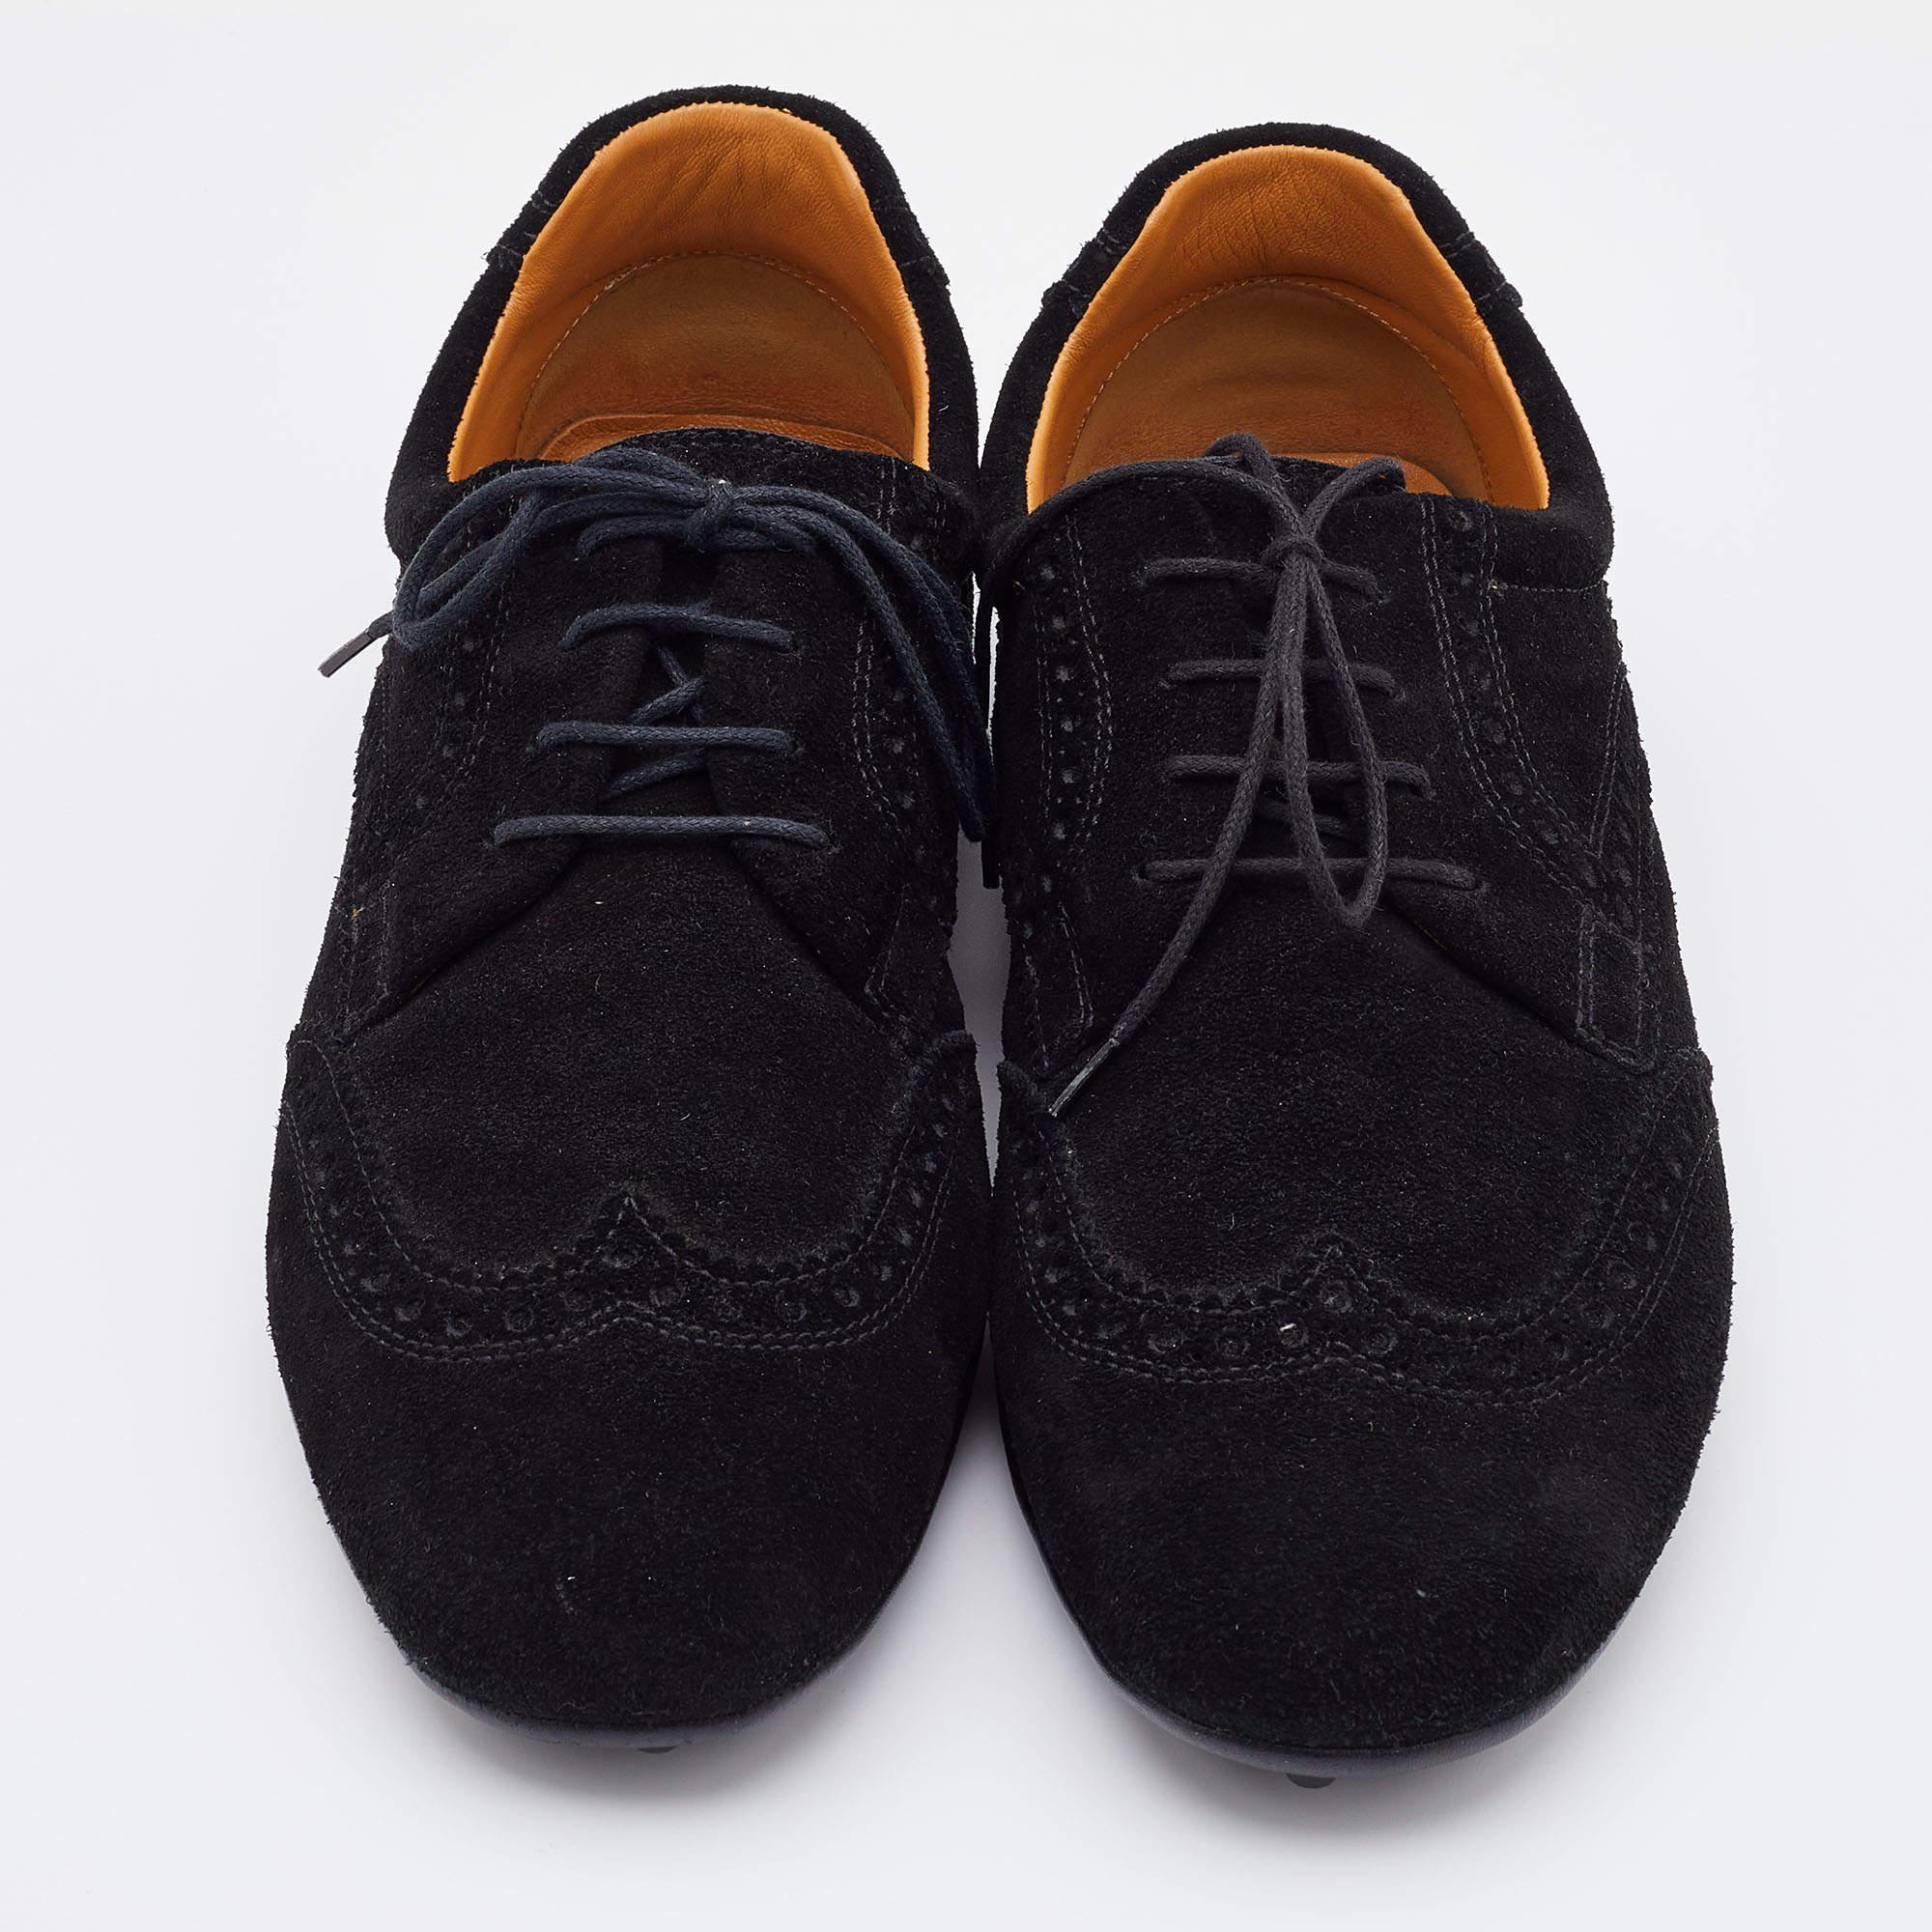 Gucci Black Brogue Suede Derby Lace Up Loafers Size 41 For Sale 4